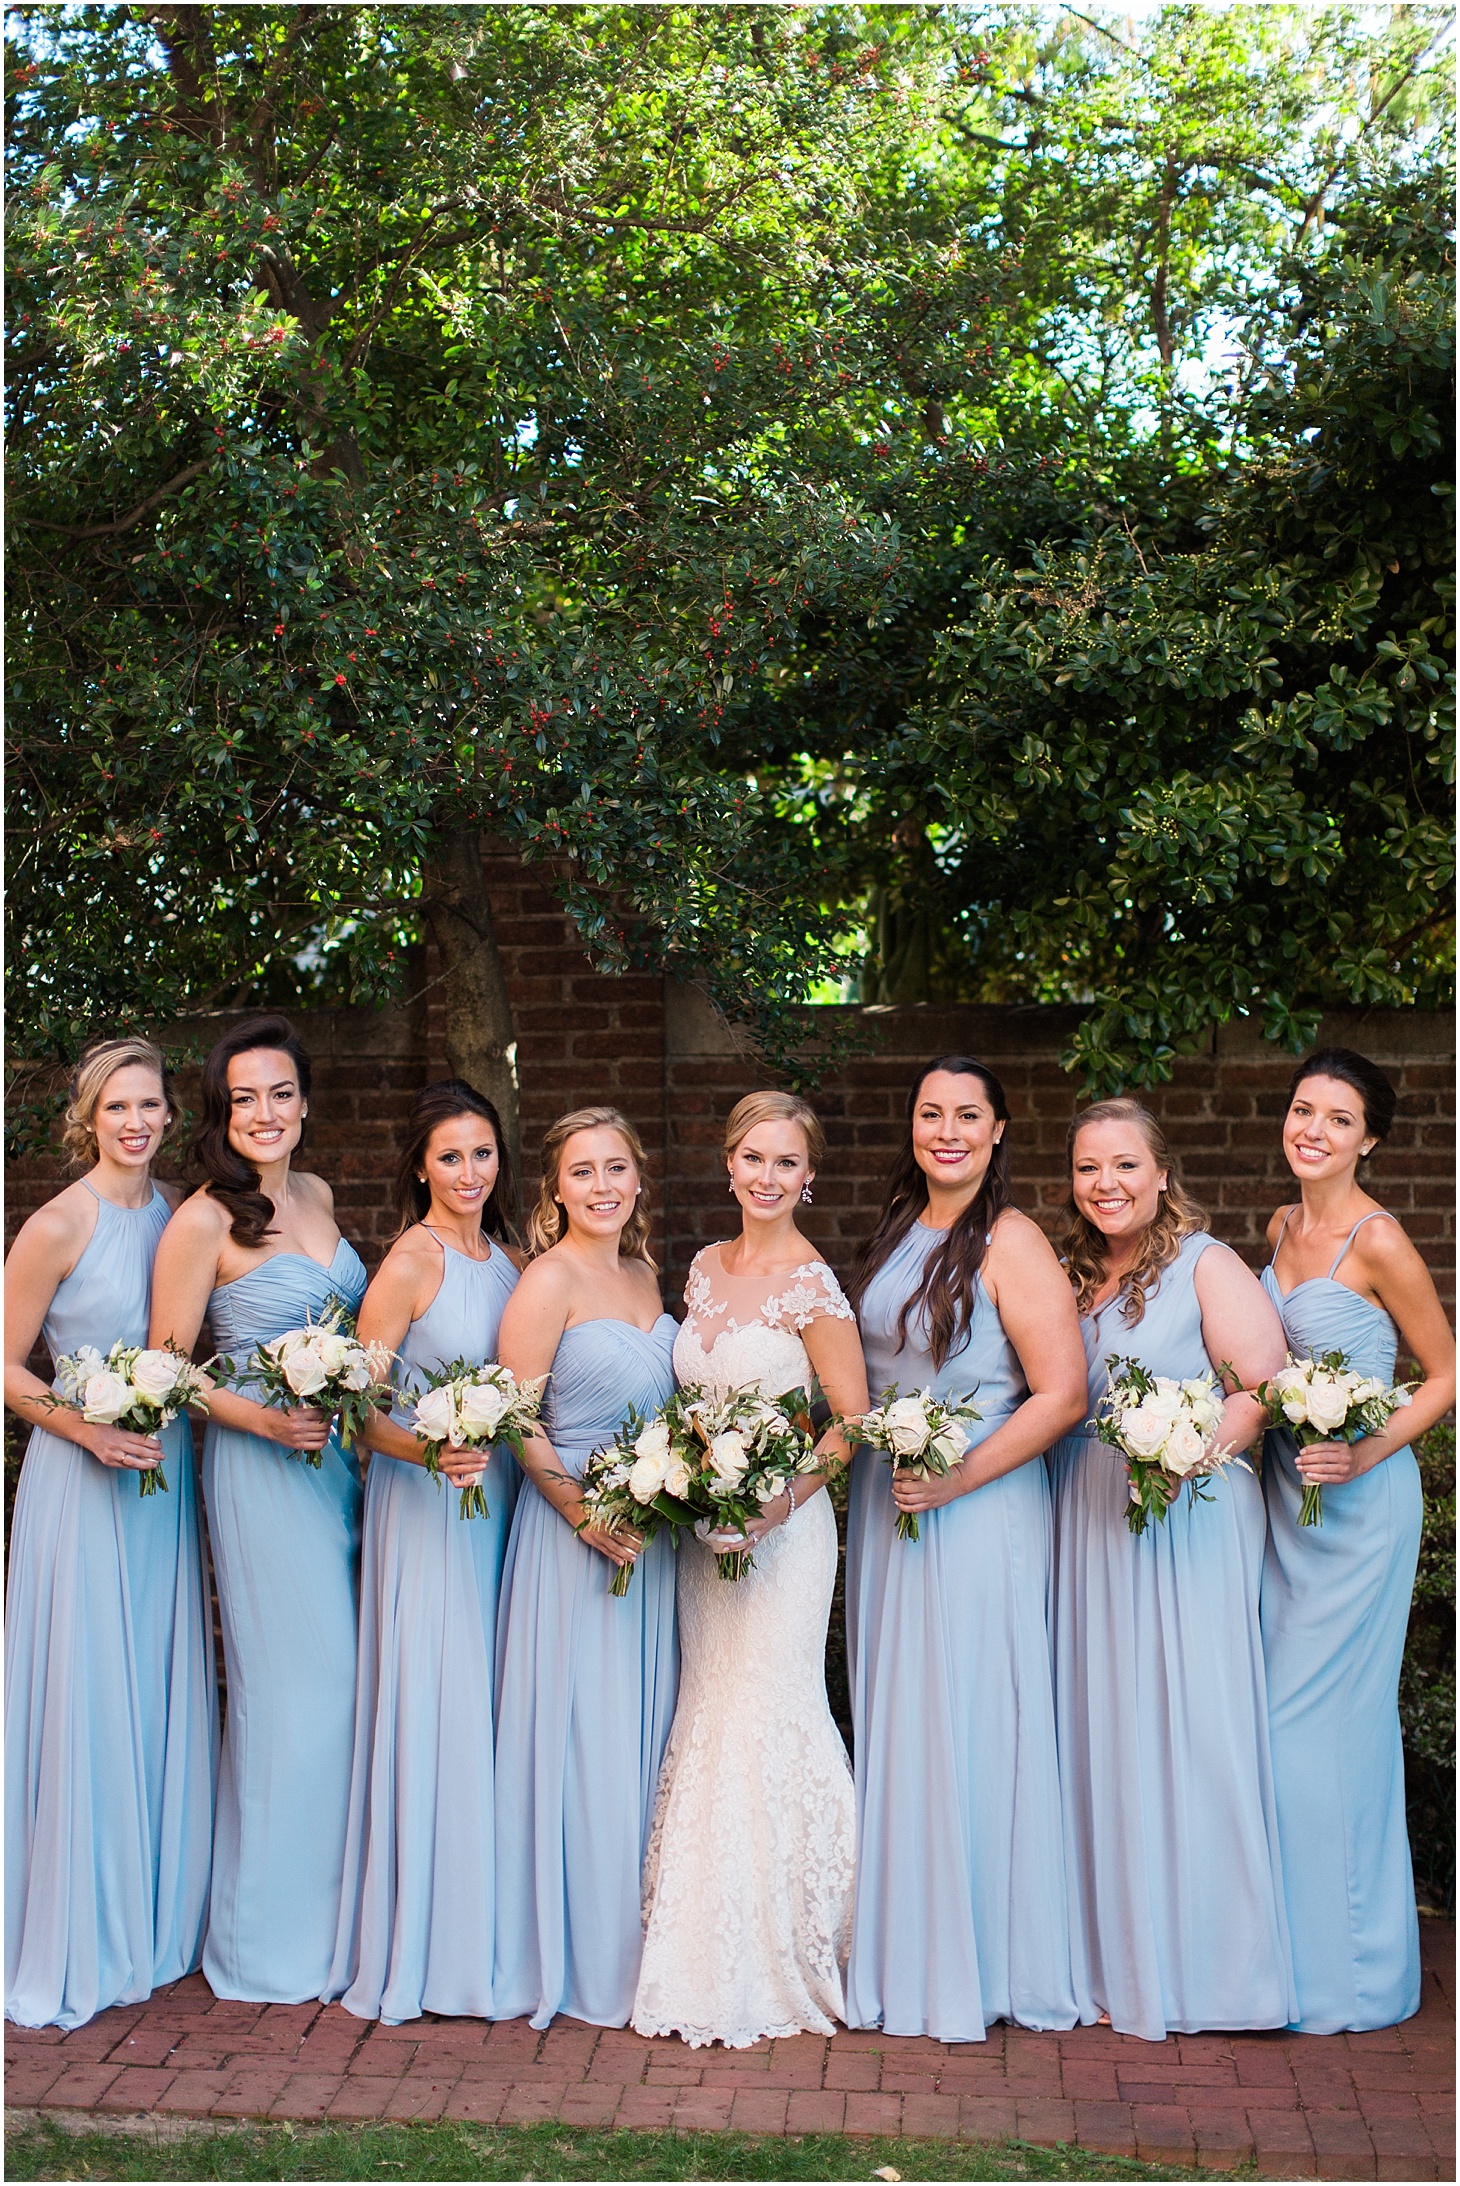 Bride and Bridesmaids at Old Presbyterian Meeting House | Southern Black Tie wedding at St. Regis DC in Dusty Blue and Ivory | Sarah Bradshaw Photography